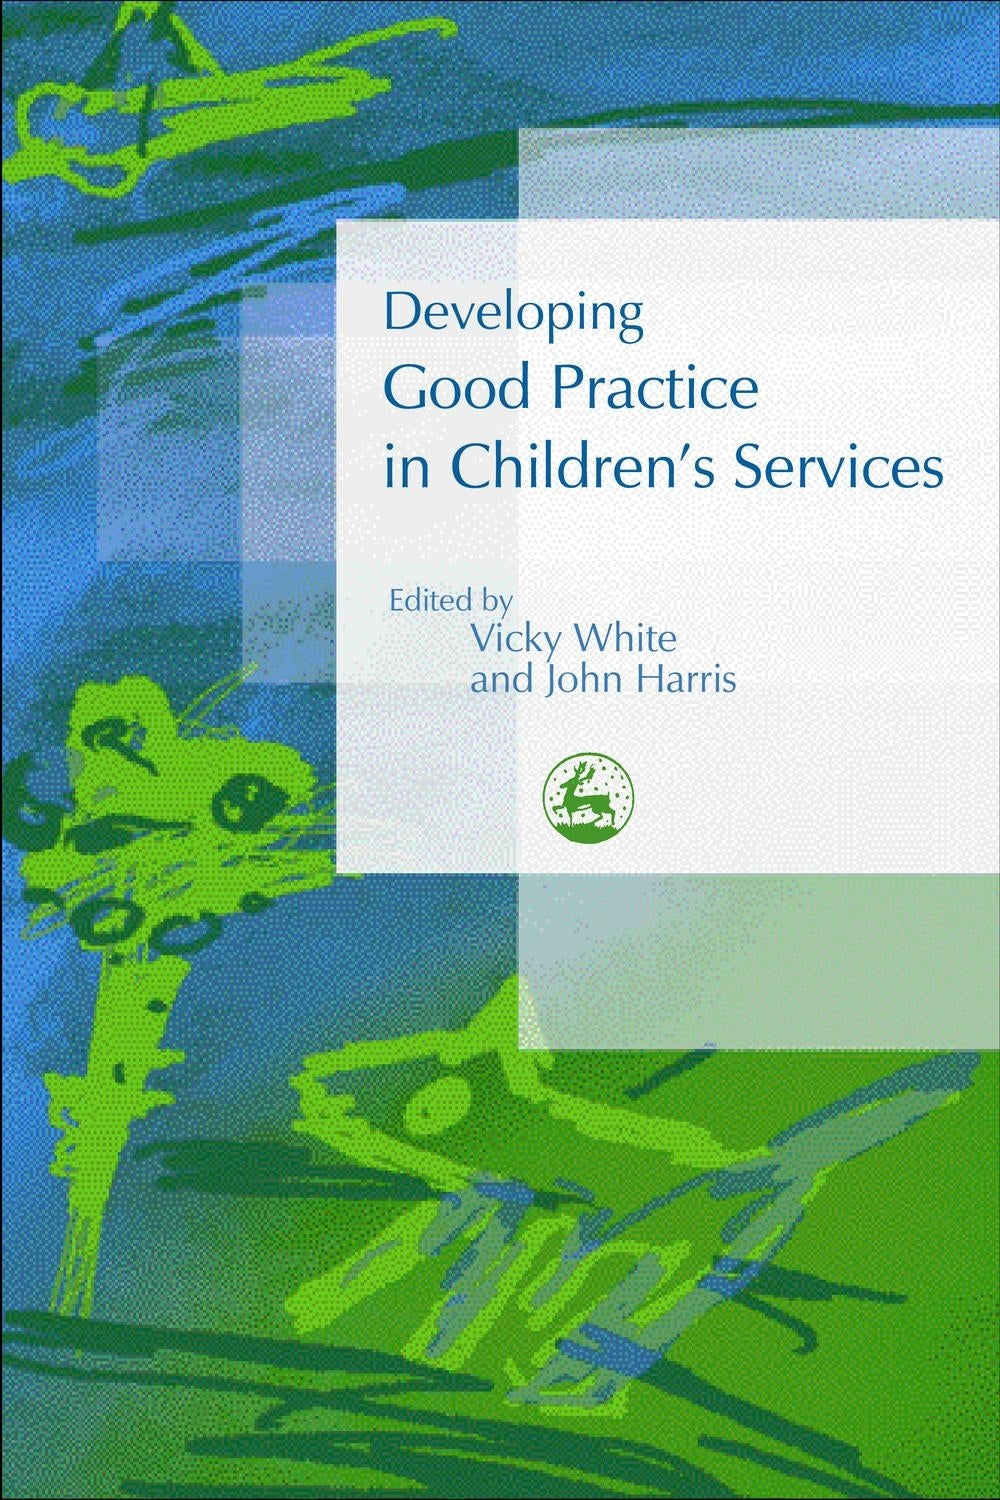 Developing Good Practice in Children's Services by Vicky White, John Harris